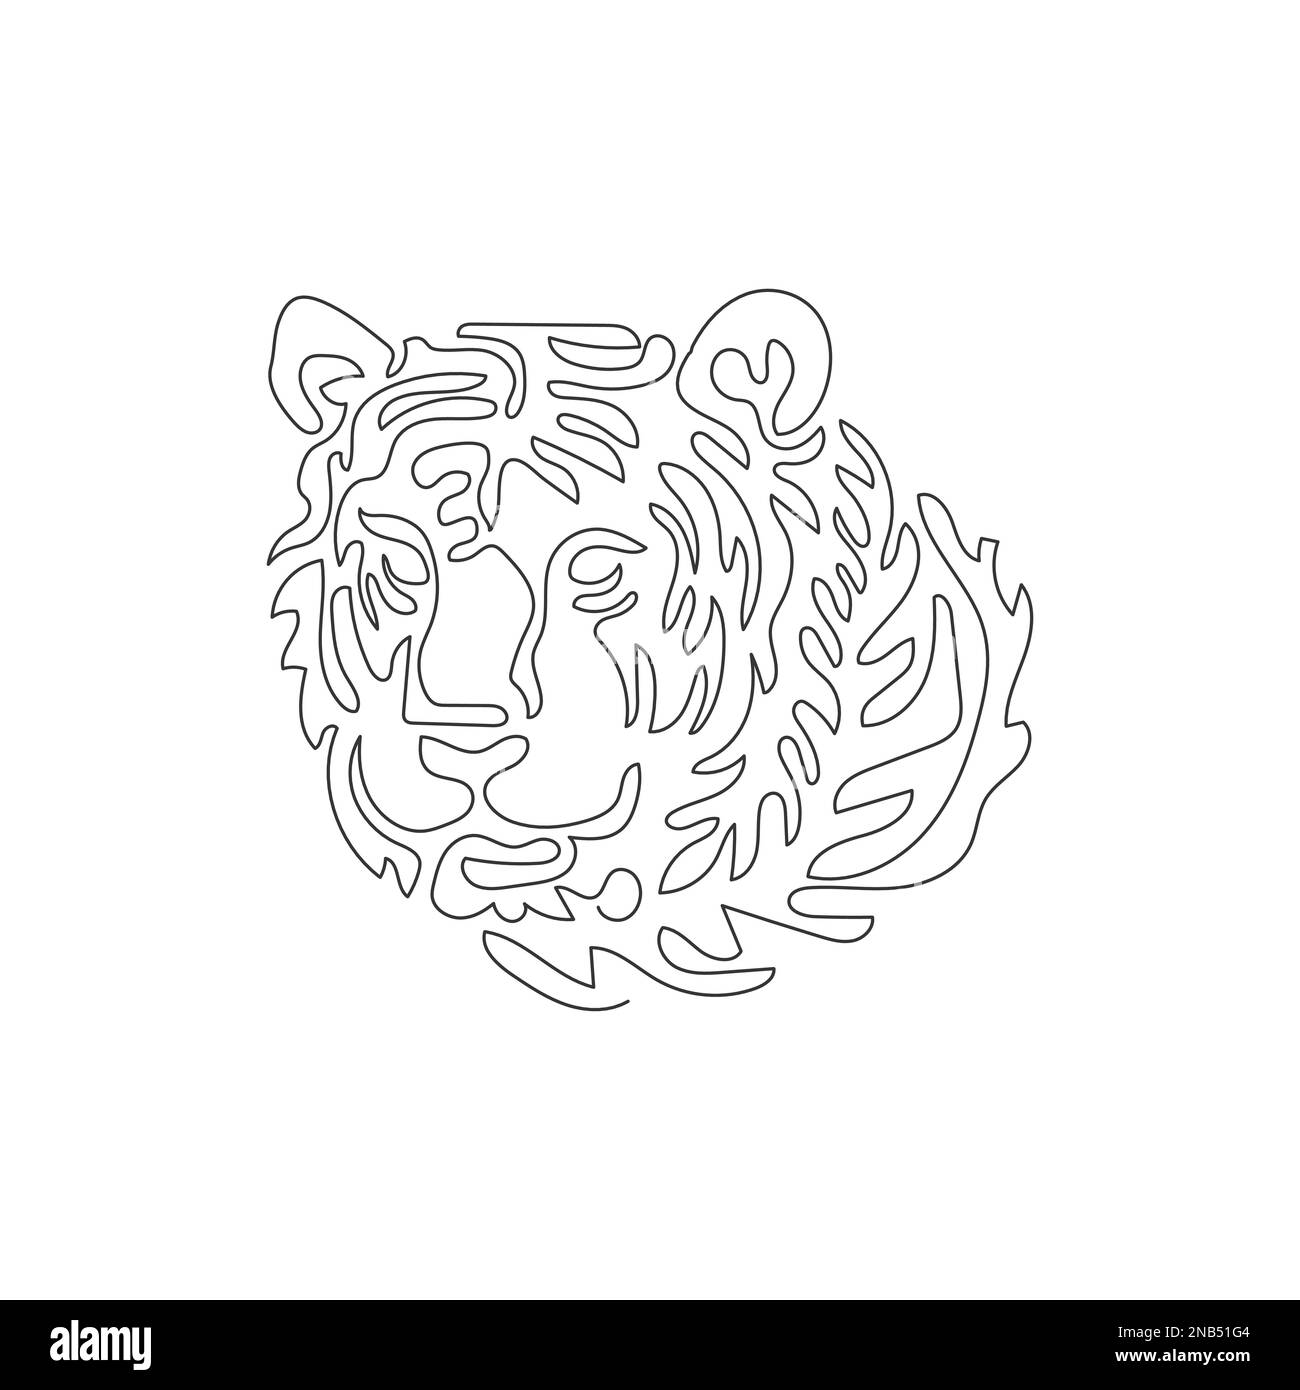 Single one curly line drawing. Scary tiger face abstract art. Continuous line draw graphic design vector illustration of carnivore tiger for icon Stock Vector